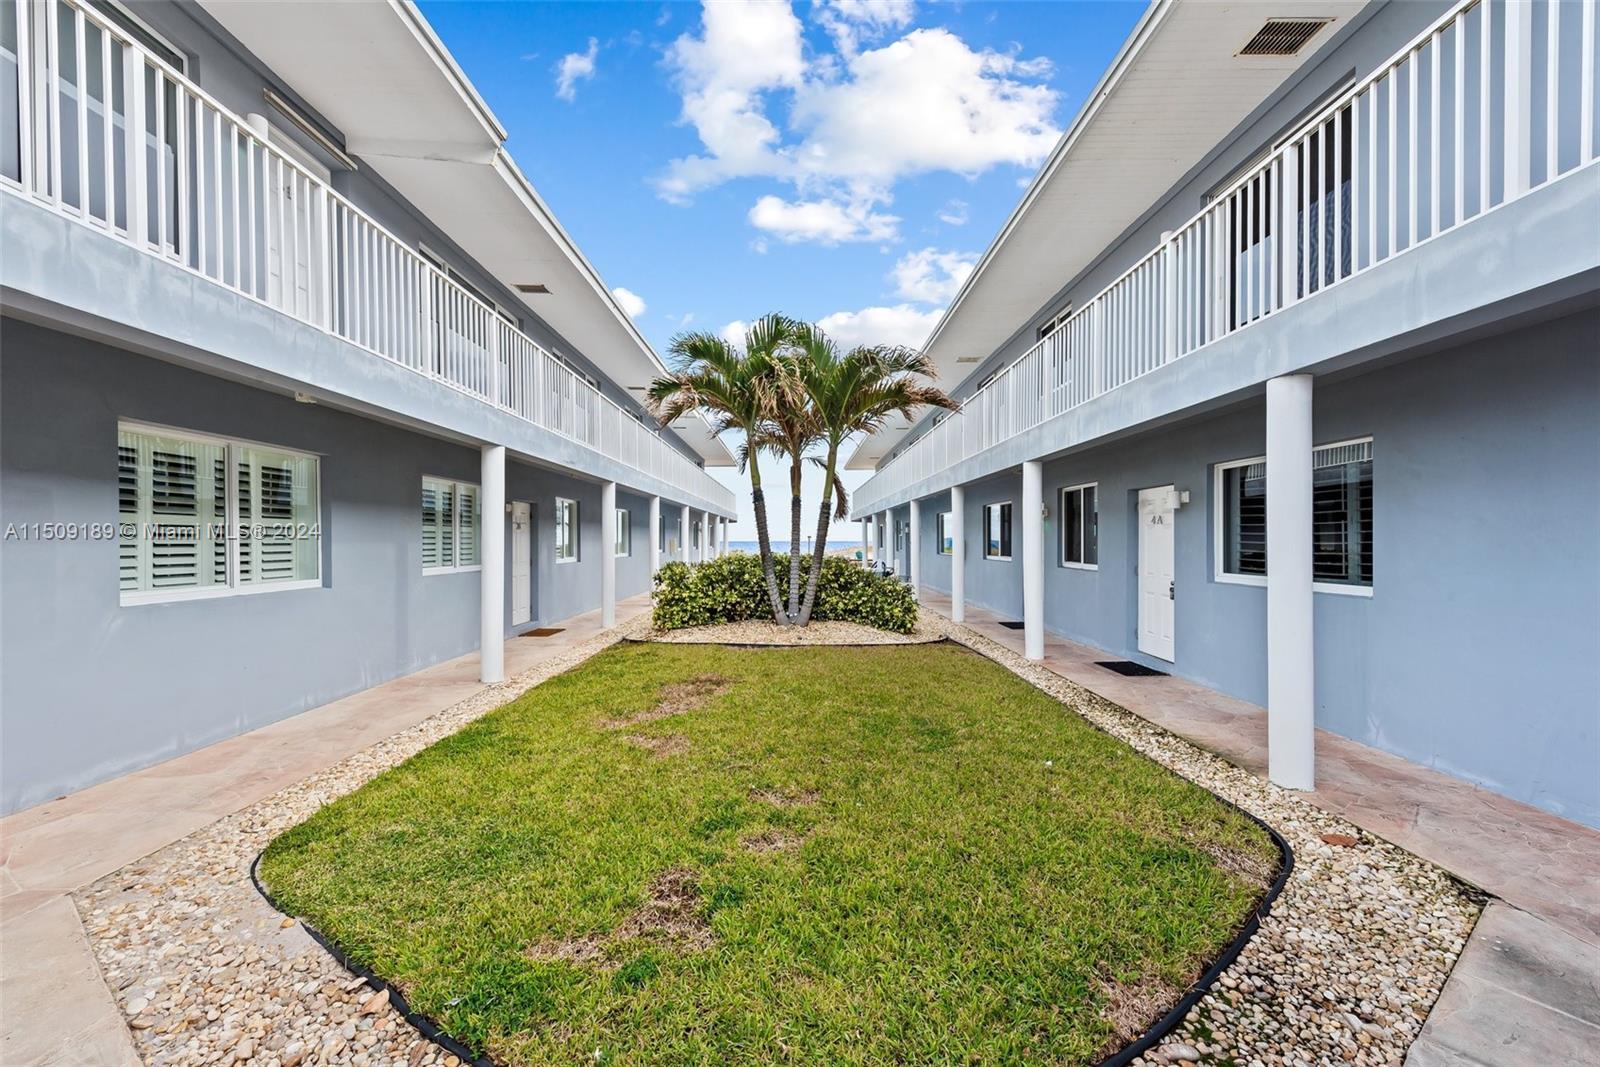 BEACHFRONT 2 BEDROOM/2.5 BATHROOM TOWNHOME COMPLETELY REMODELED IN A BOUTIQUE BLDG. CORNER UNIT WITH